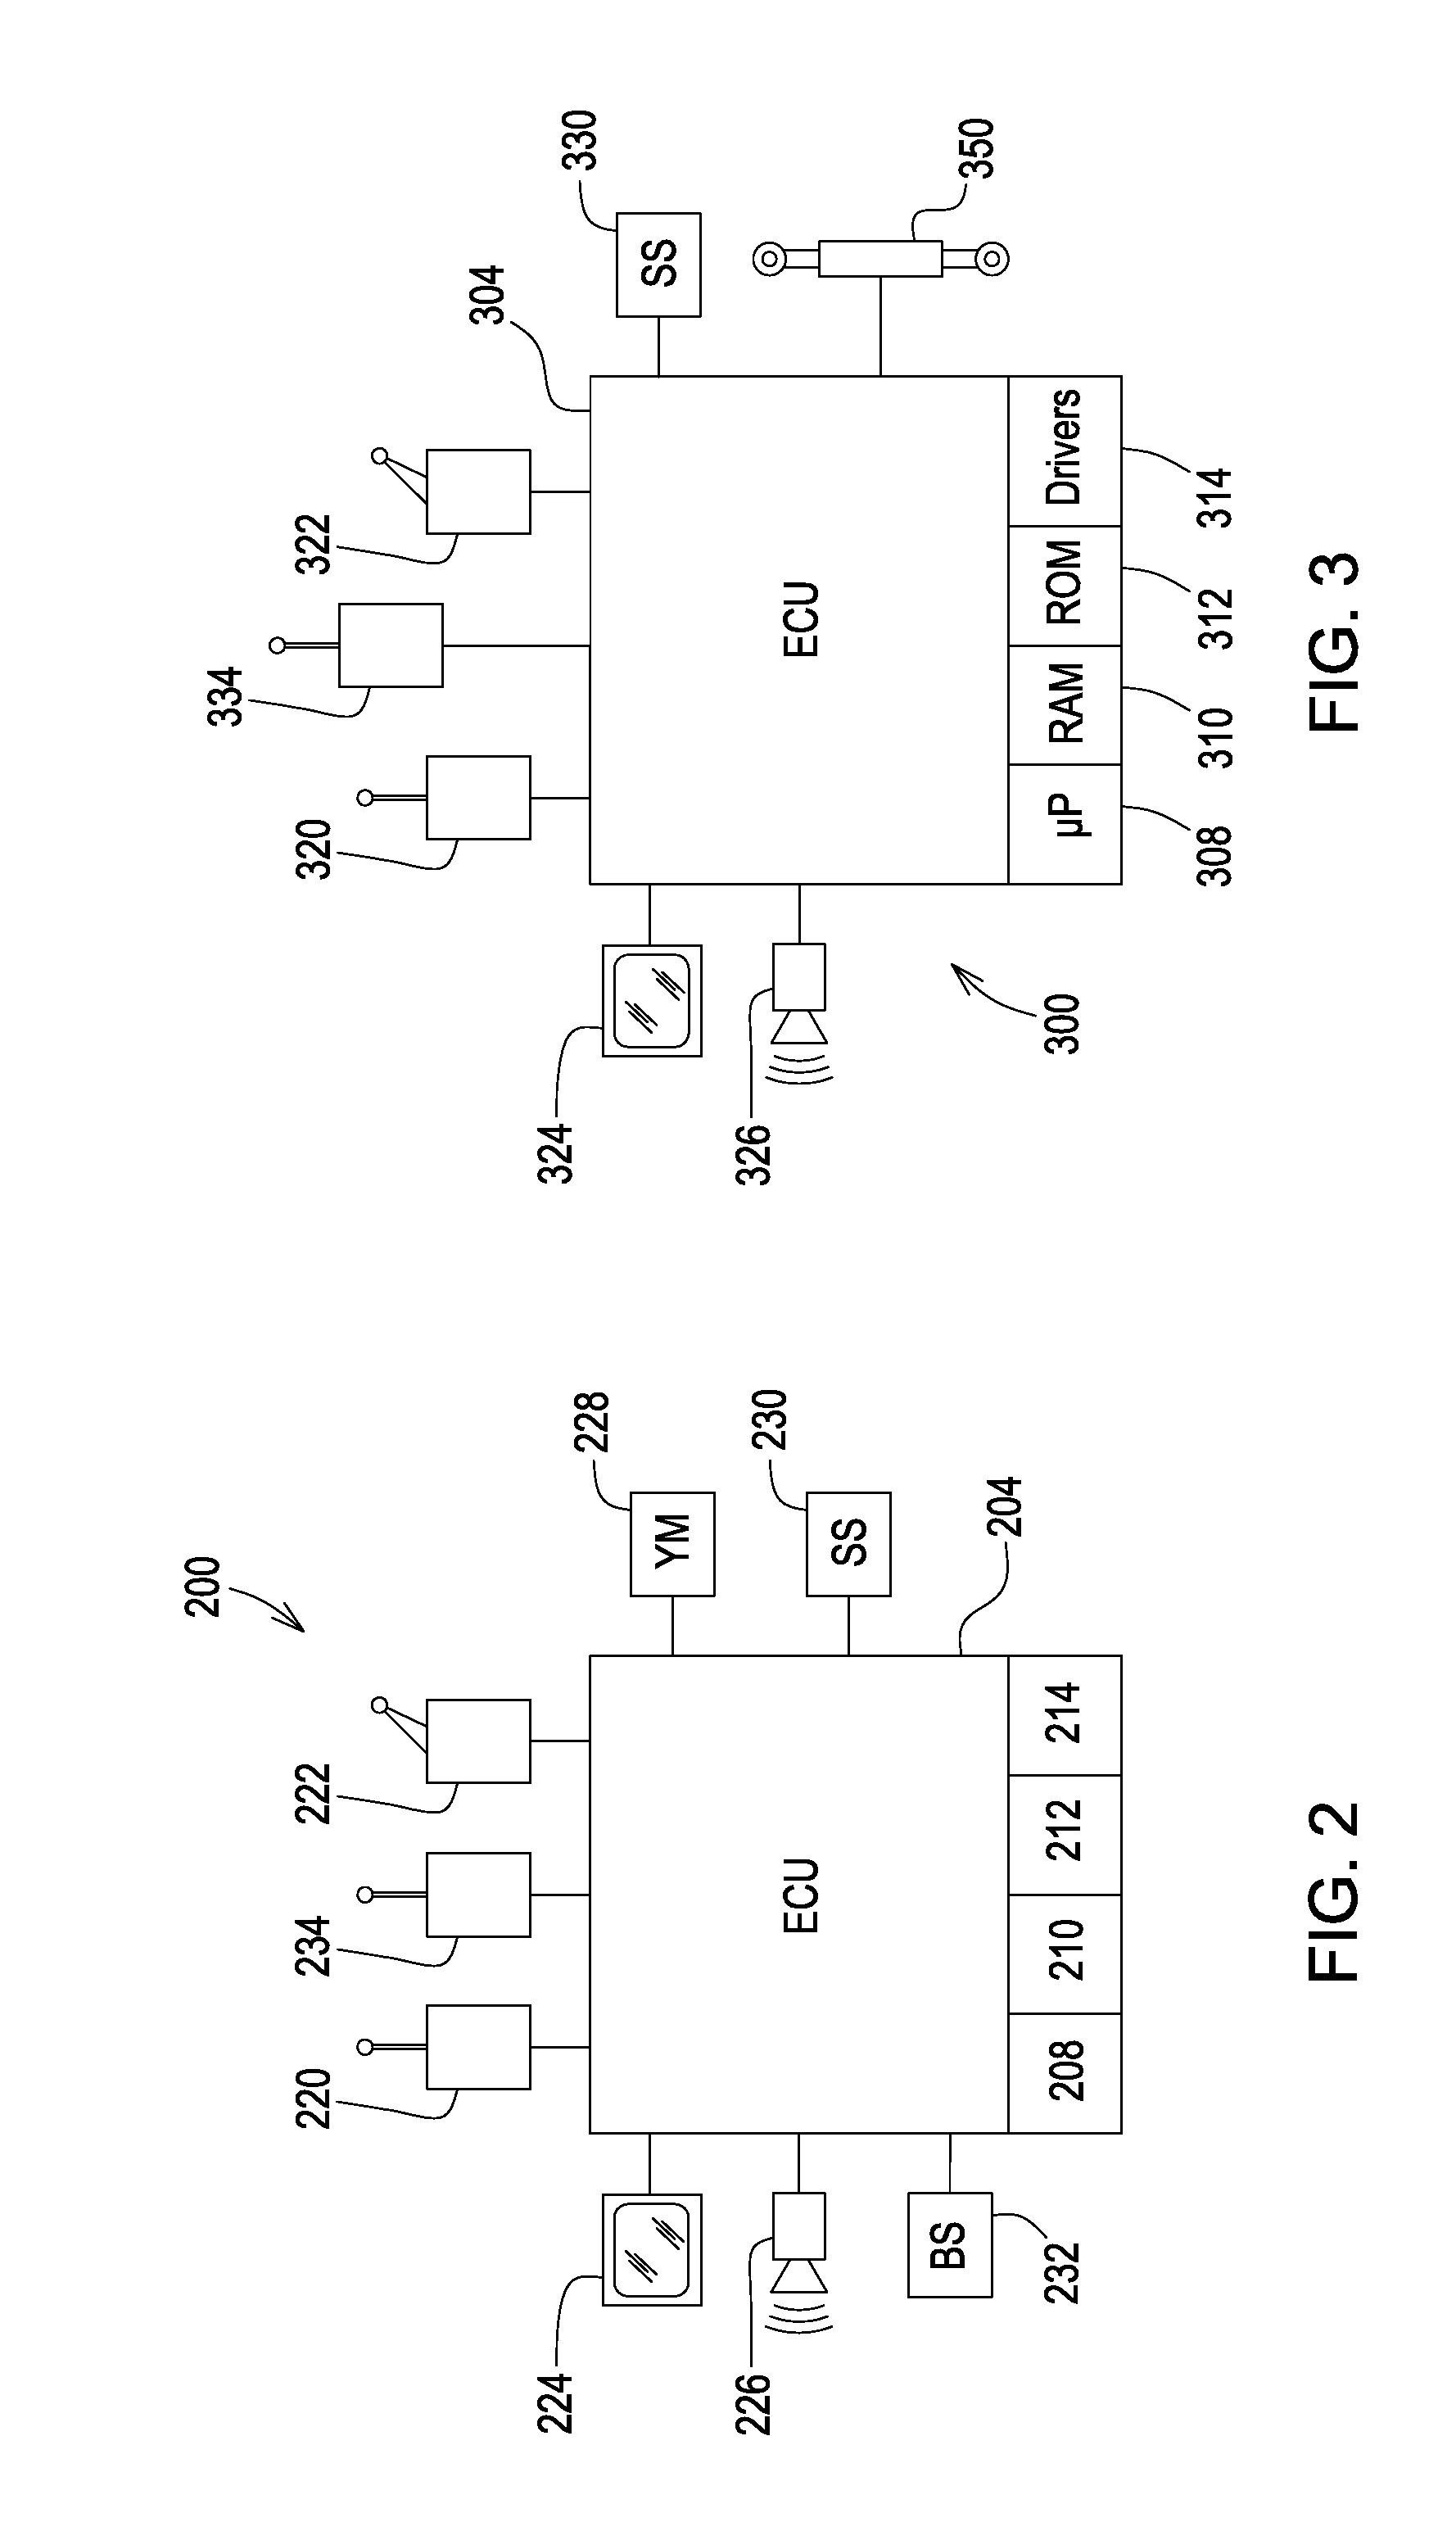 System for Coordinating the Relative Movements of an Agricultural Harvester and a Cart